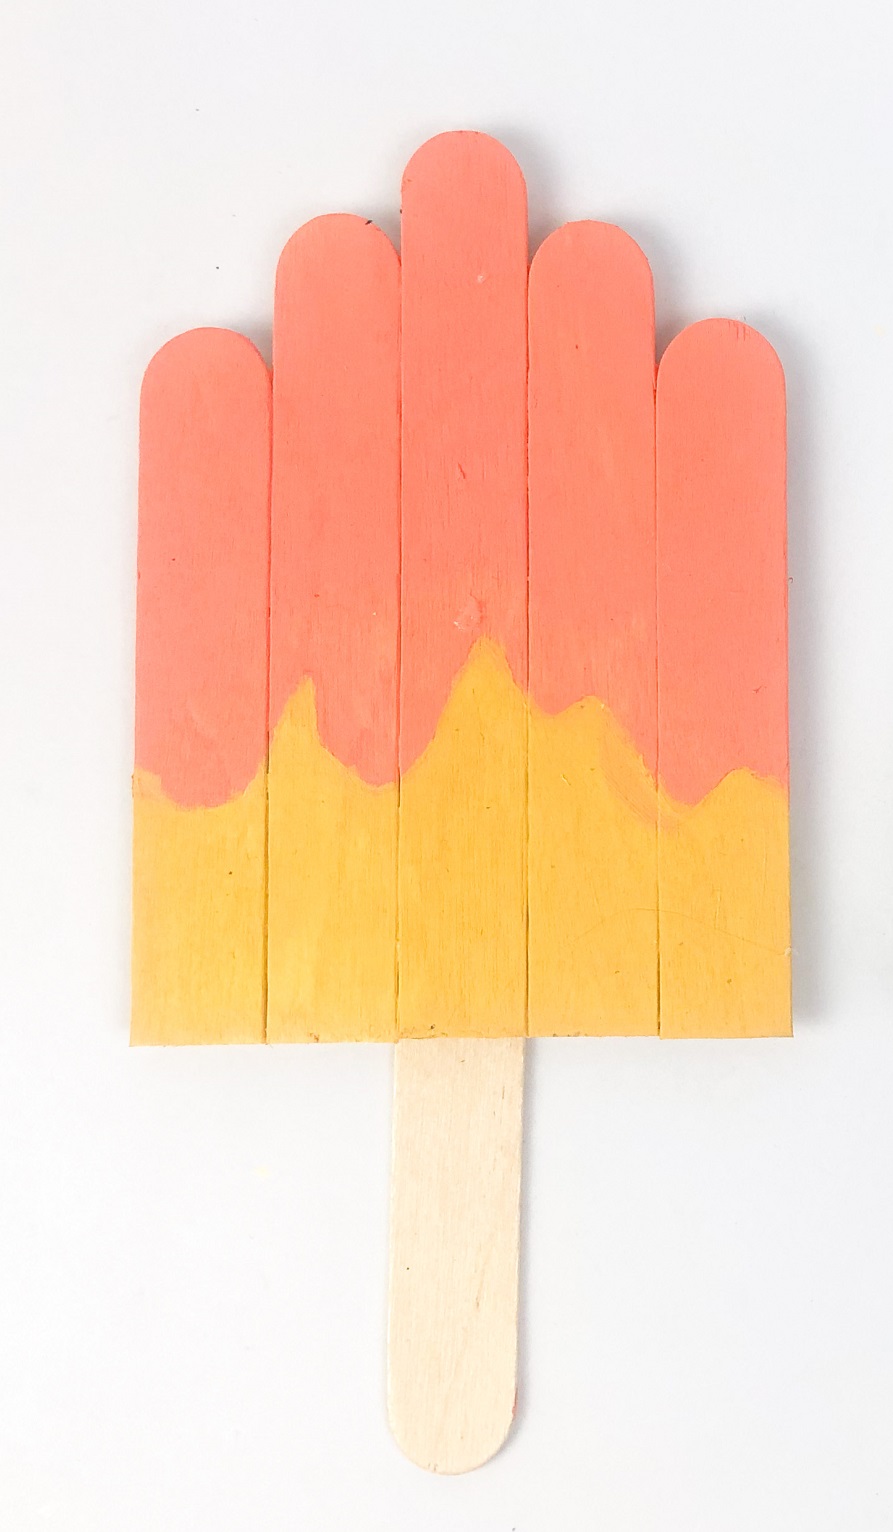 Popsicle sticks glued and cut into a popsicle shape. They are painted yellow and pink.